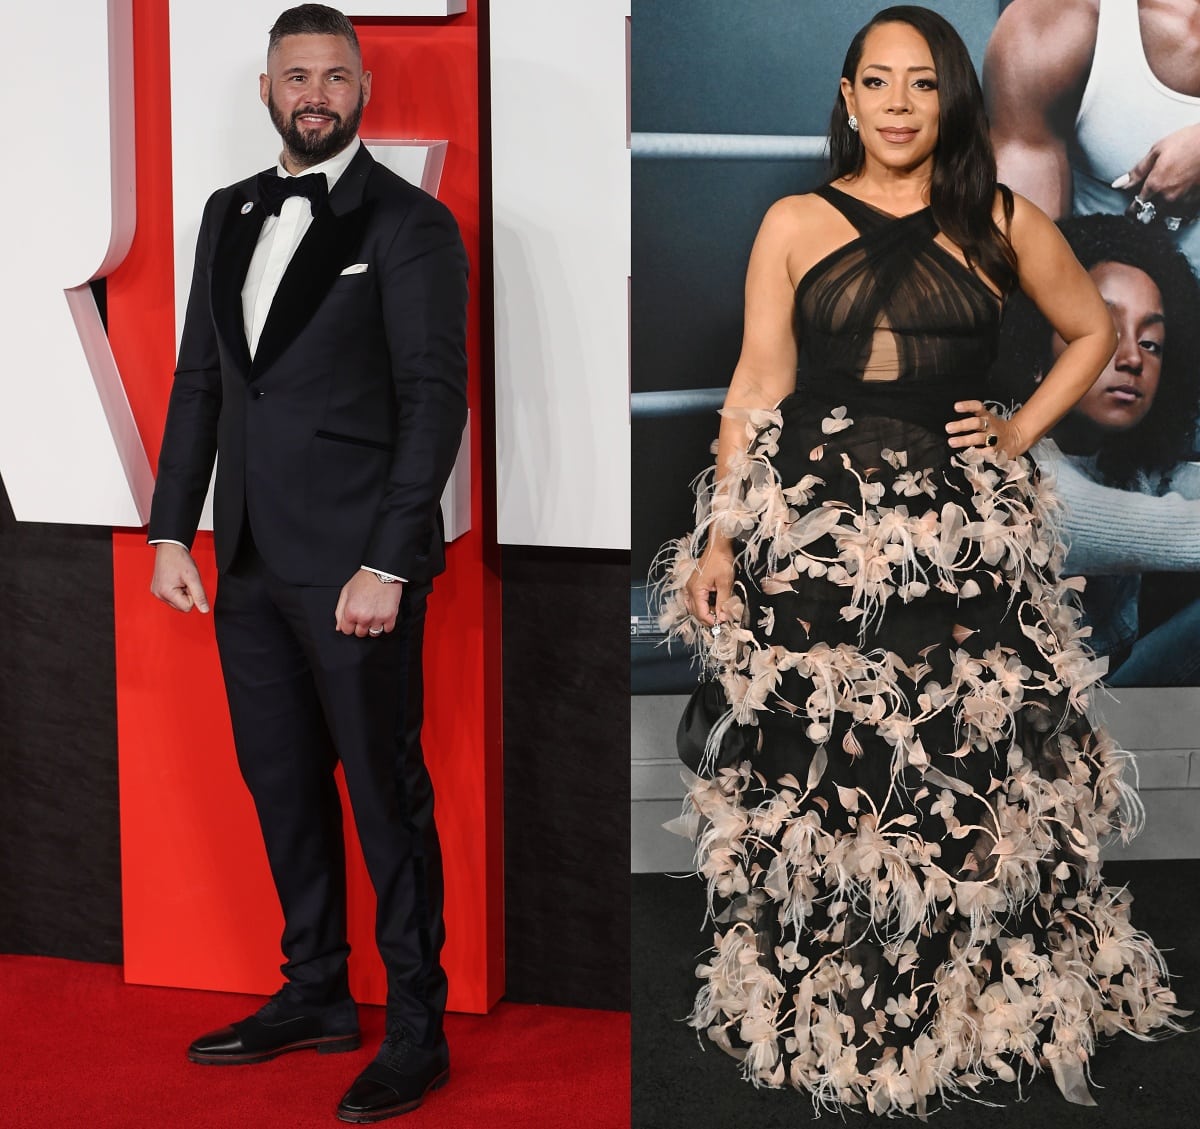 Tony Bellew at the European premiere of Creed III and Selenis Leyva at the Los Angeles premiere of Creed III